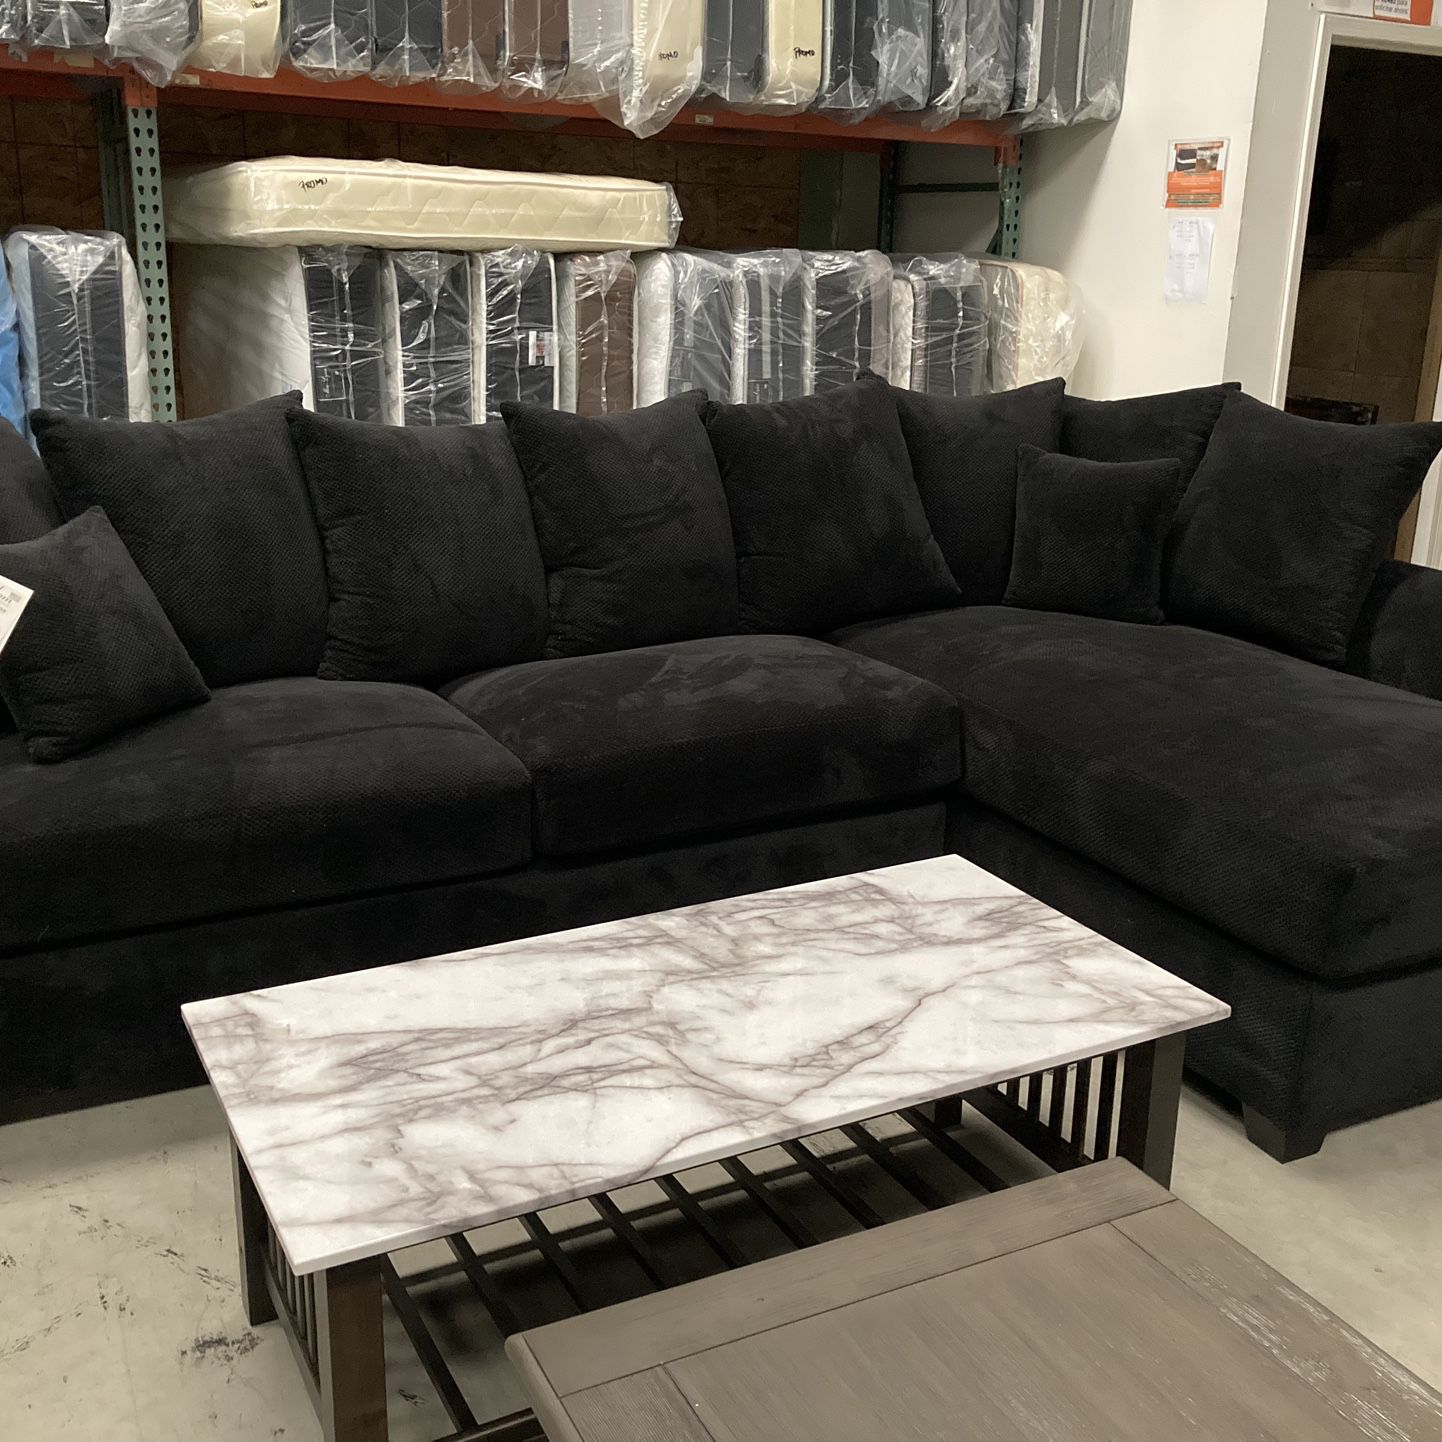 Black Sectional Sofa. Left Or Right Side Chaise Lounger. Other Colors And Fabrics Available.